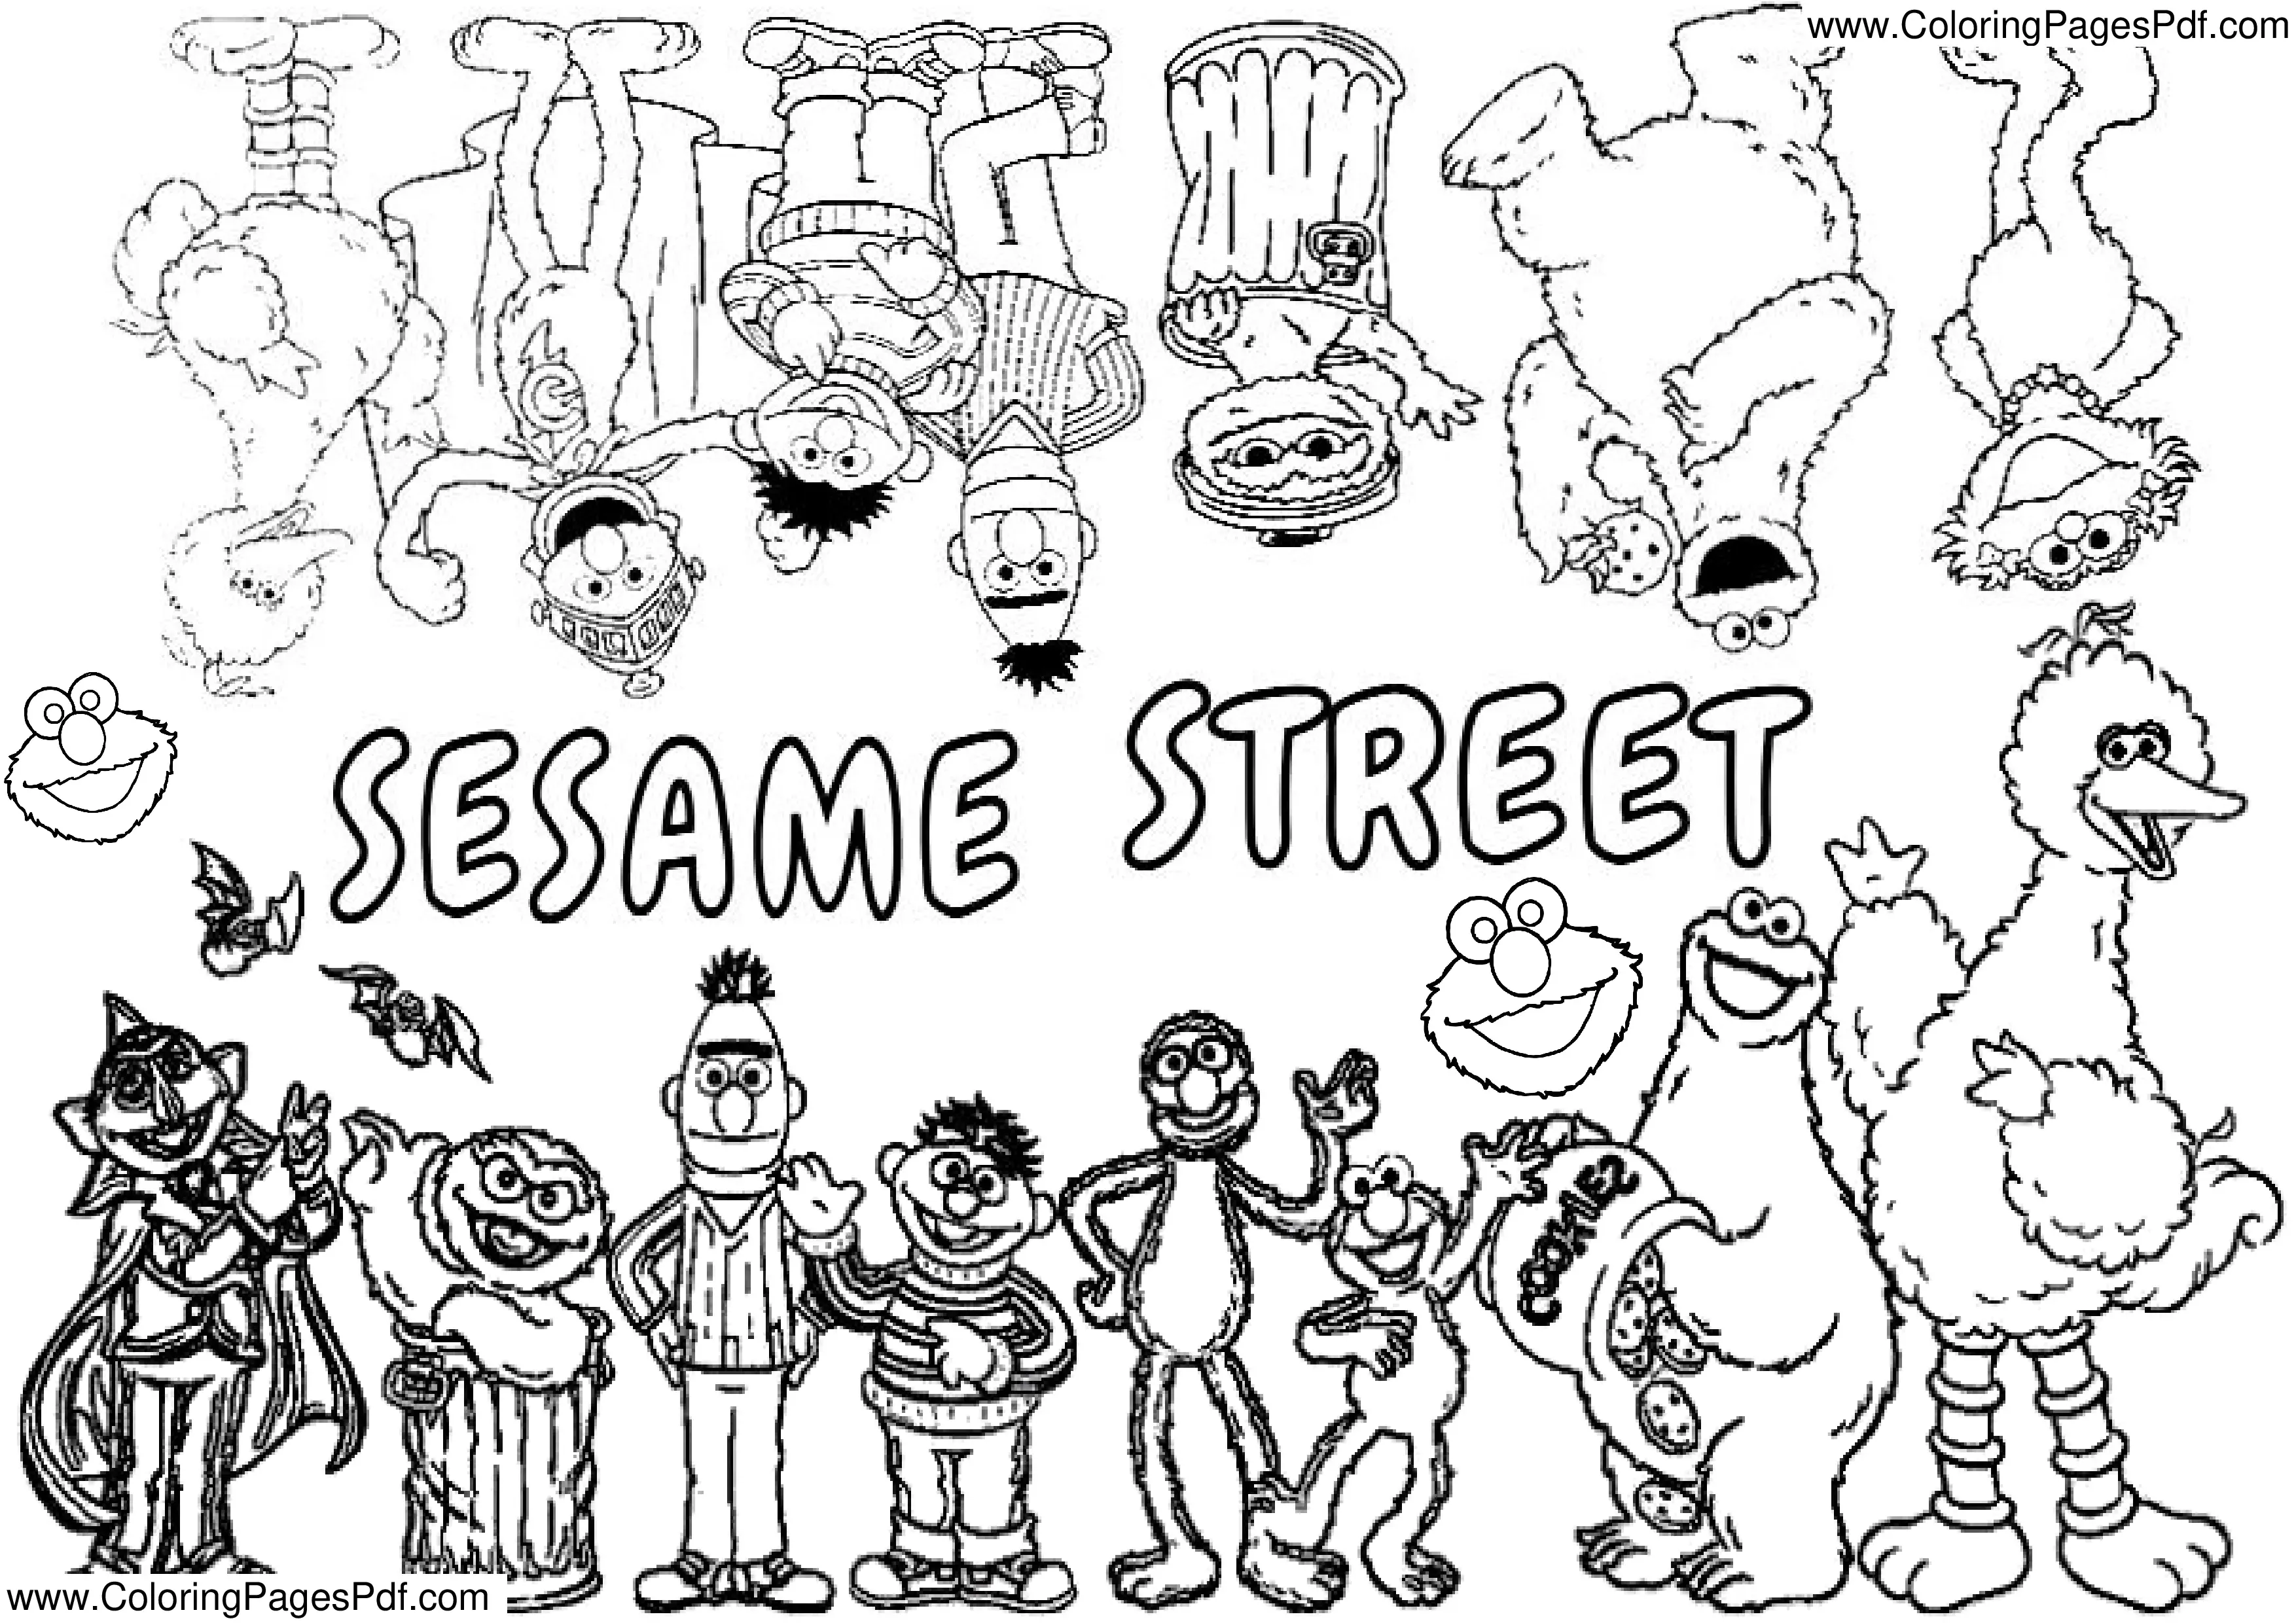 Sesame street coloring pages letters